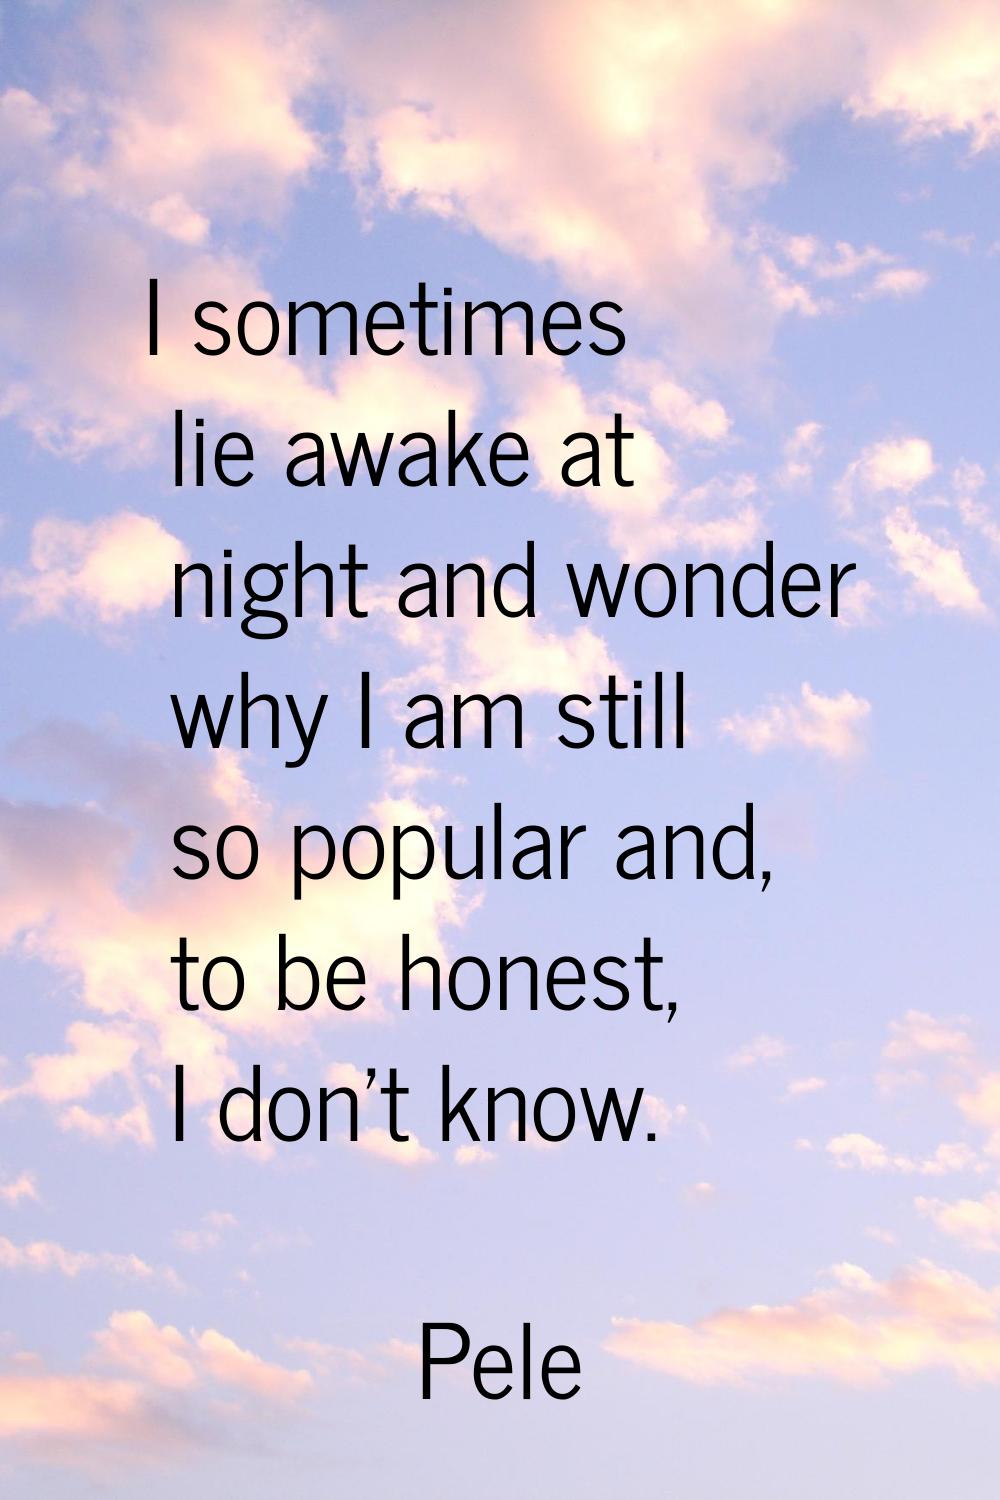 I sometimes lie awake at night and wonder why I am still so popular and, to be honest, I don't know